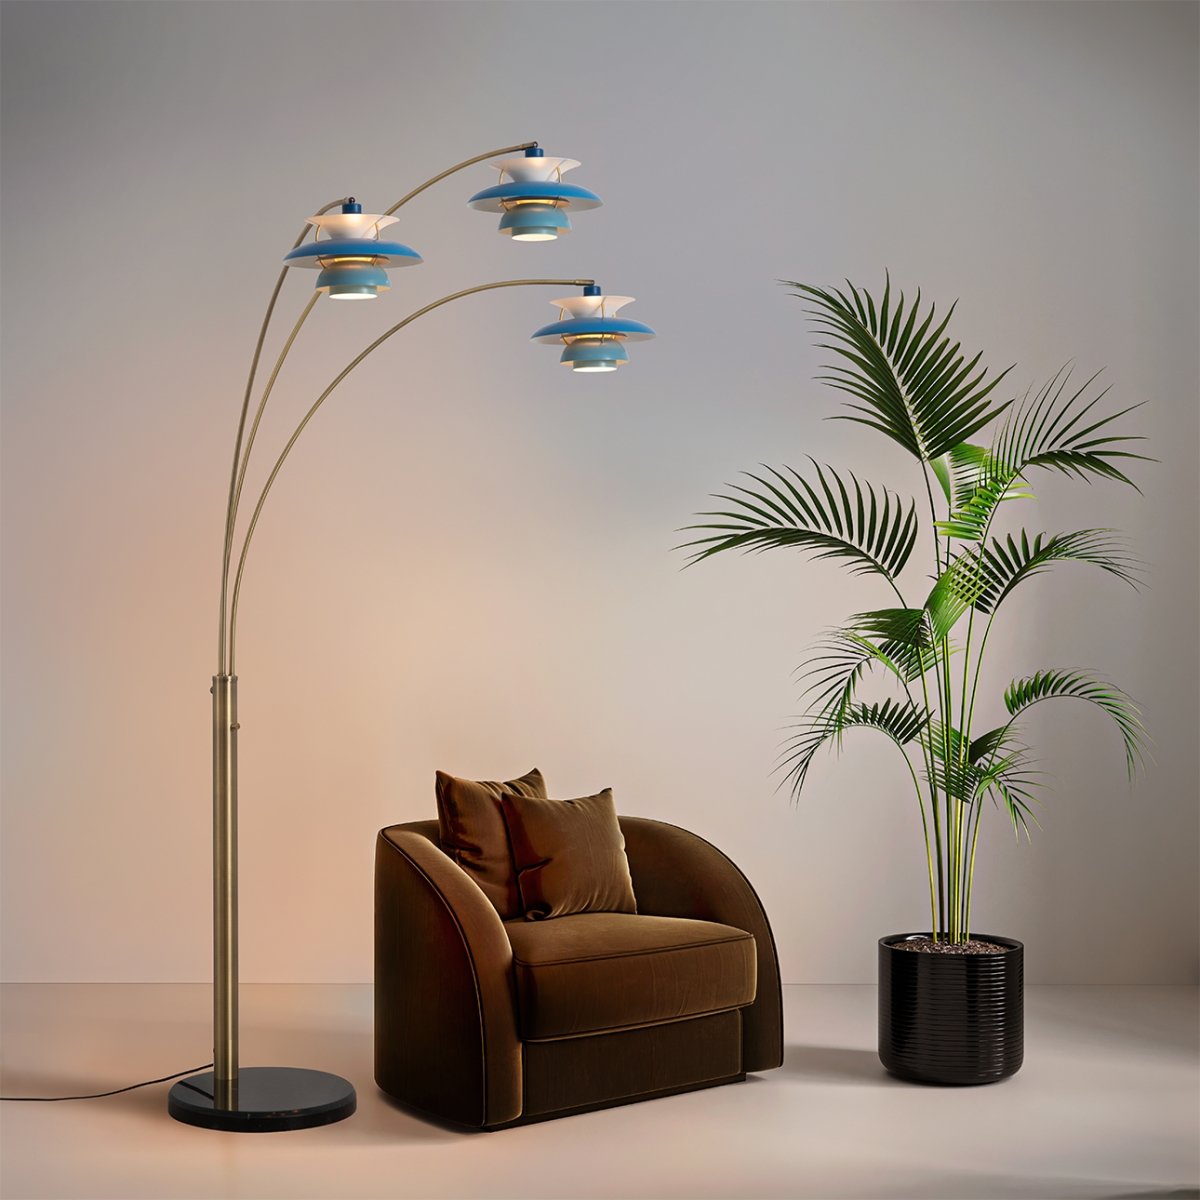 Picture of Nova of California 2310825B Palm Springs 3 Light Arc Floor Lamp - Weathered Brass & Blue